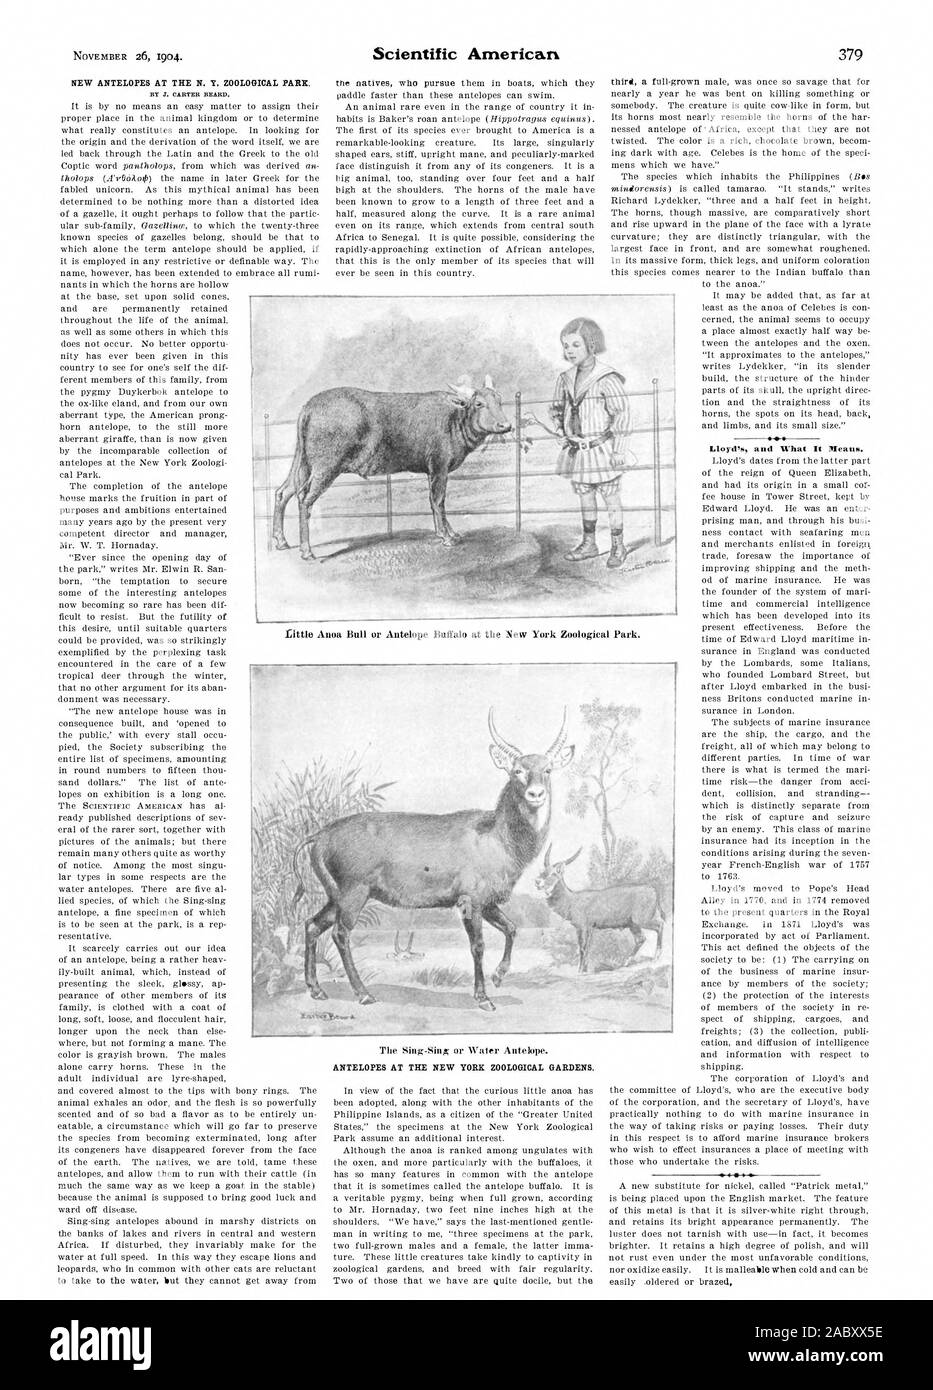 NEW ANTELOPES AT THE N. Y. ZOOLOGICAL PARK. ANTELOPES AT THE NEW YORK ZOOLOGICAL GARDENS. Lloyd's and What It Means., scientific american, 1904-11-26 Stock Photo